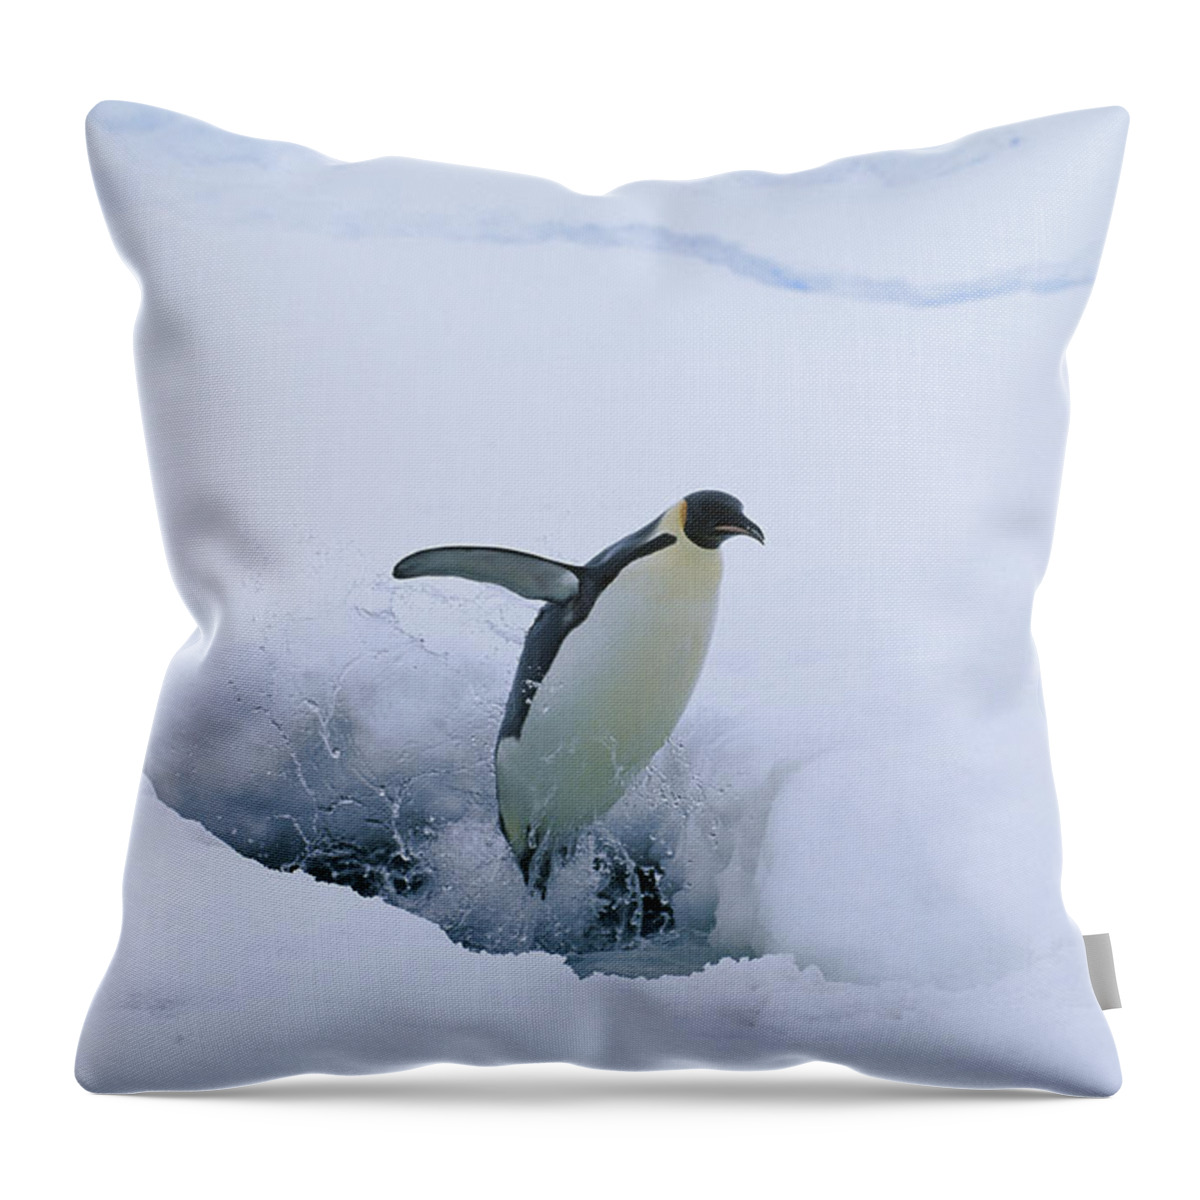 Feb0514 Throw Pillow featuring the photograph Emperor Penguin Leaping Through Ice by Pete Oxford